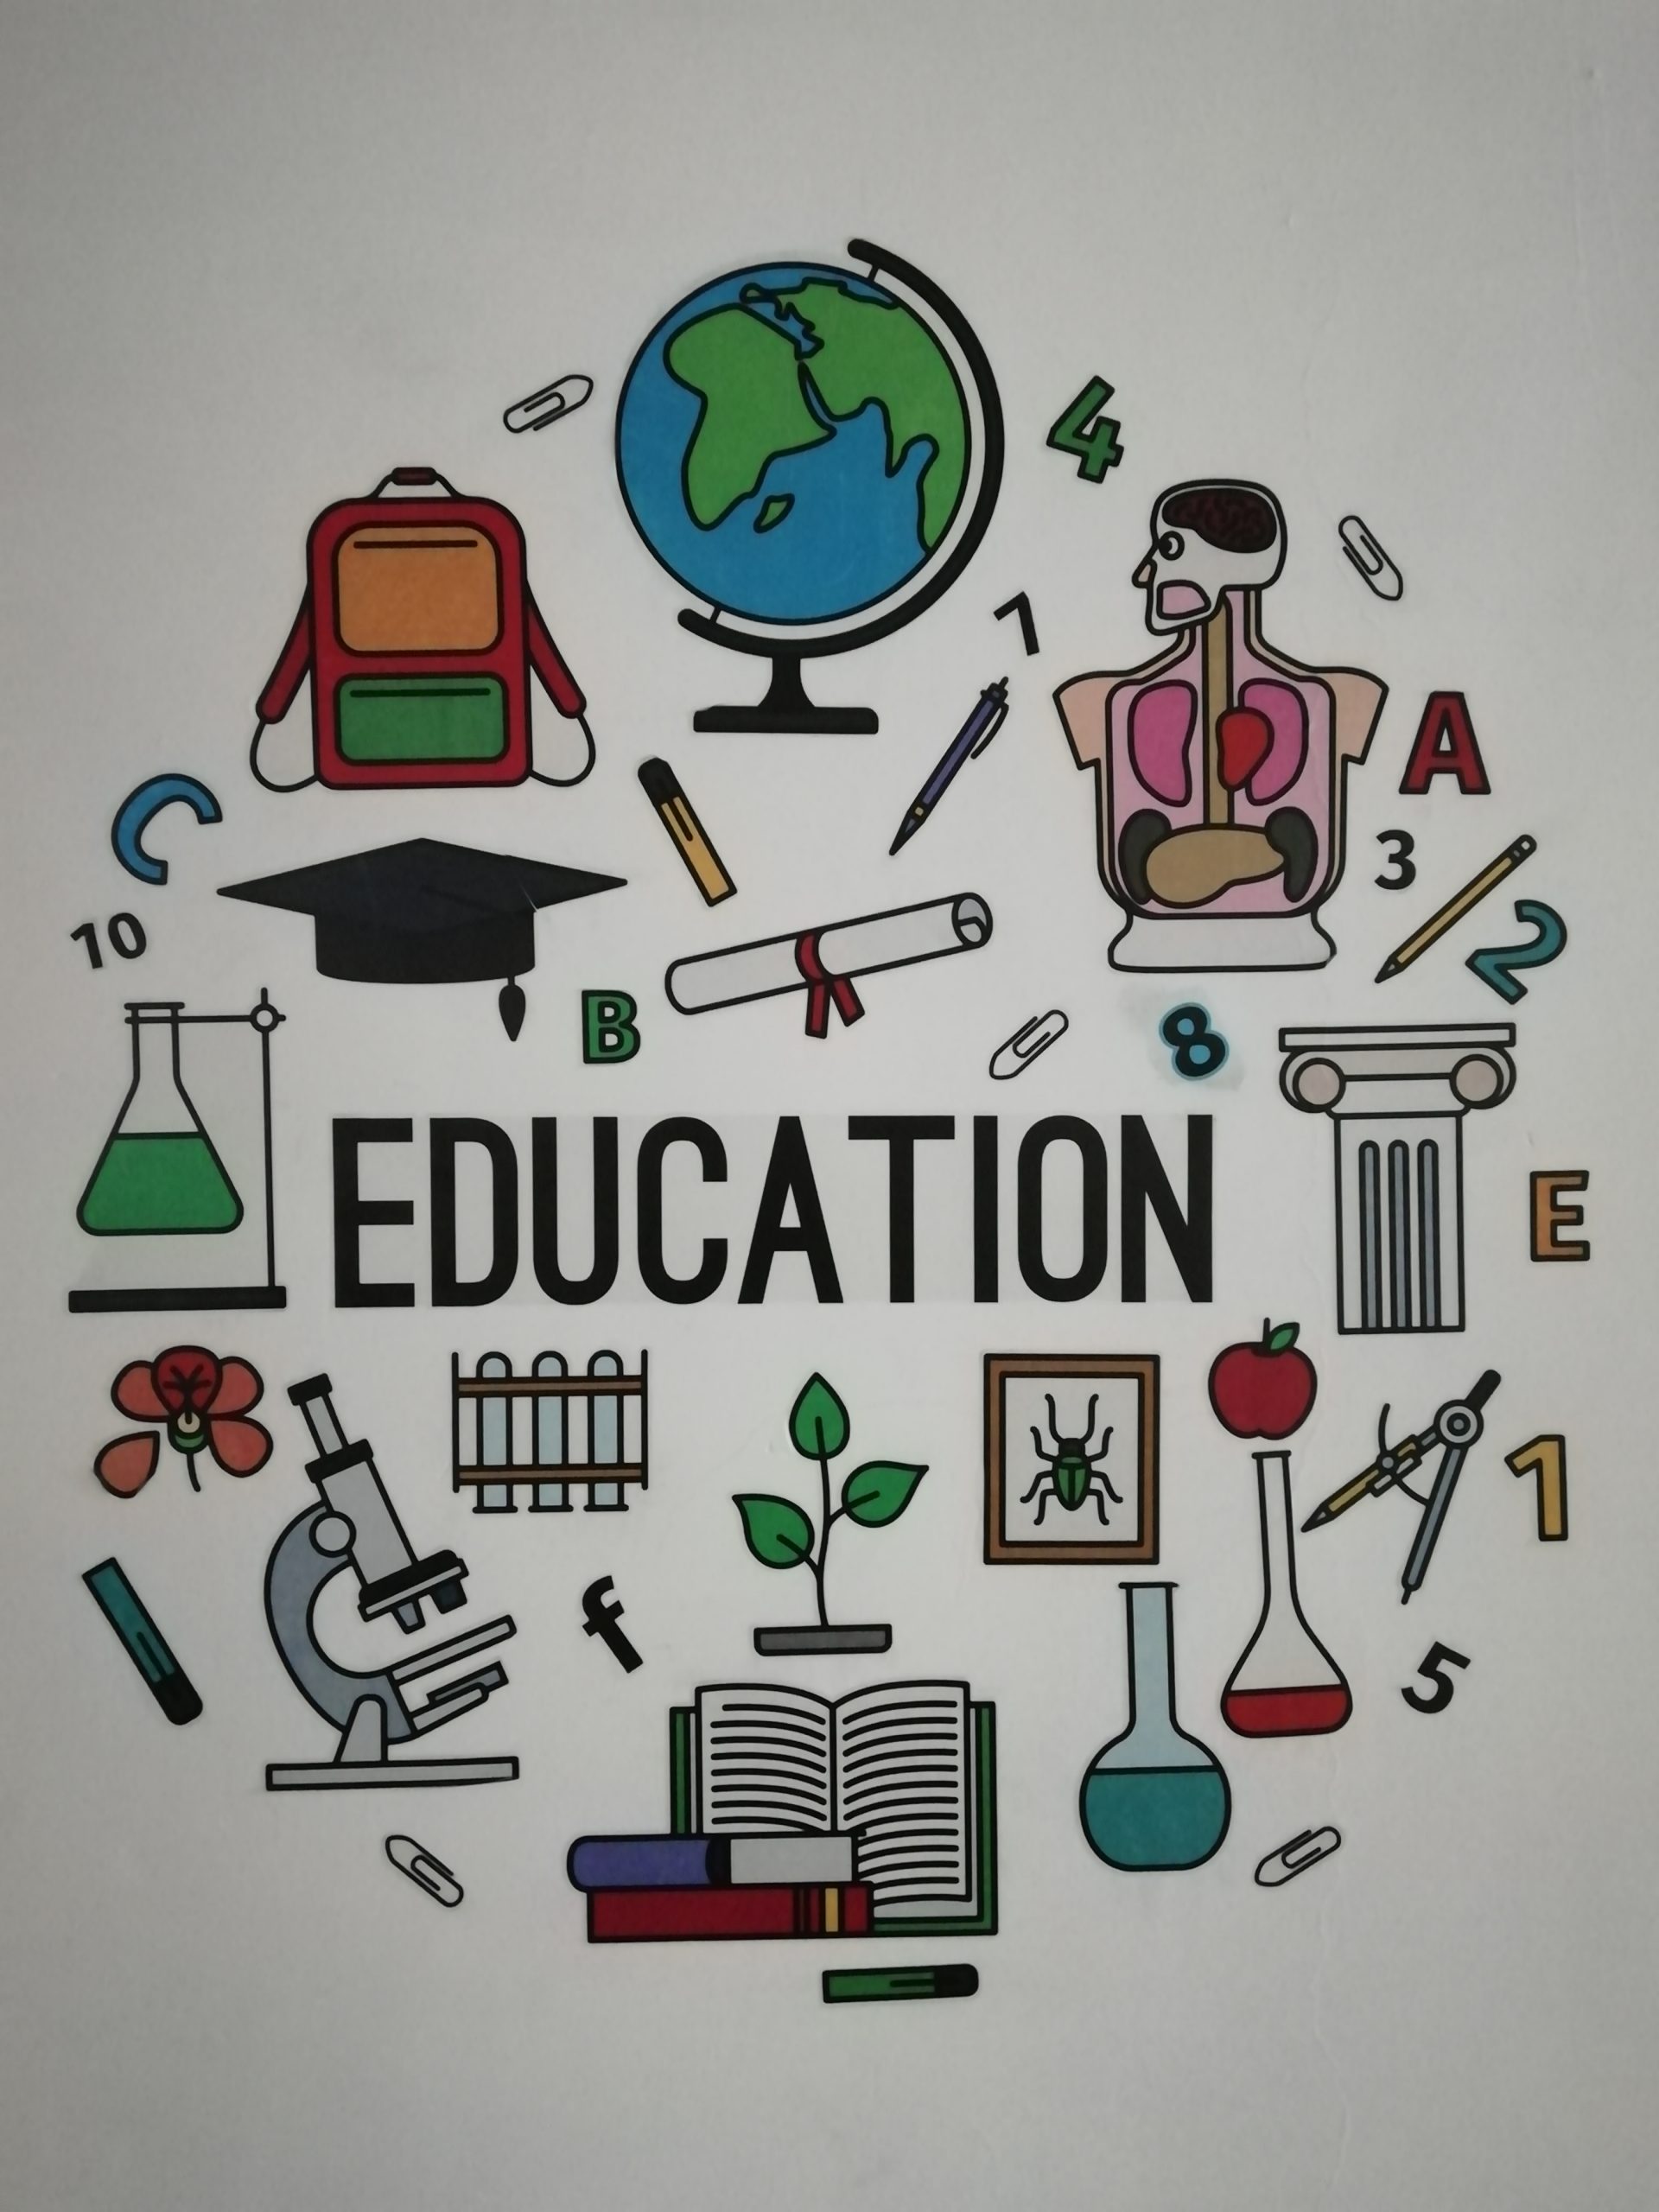 Education divided into four parts